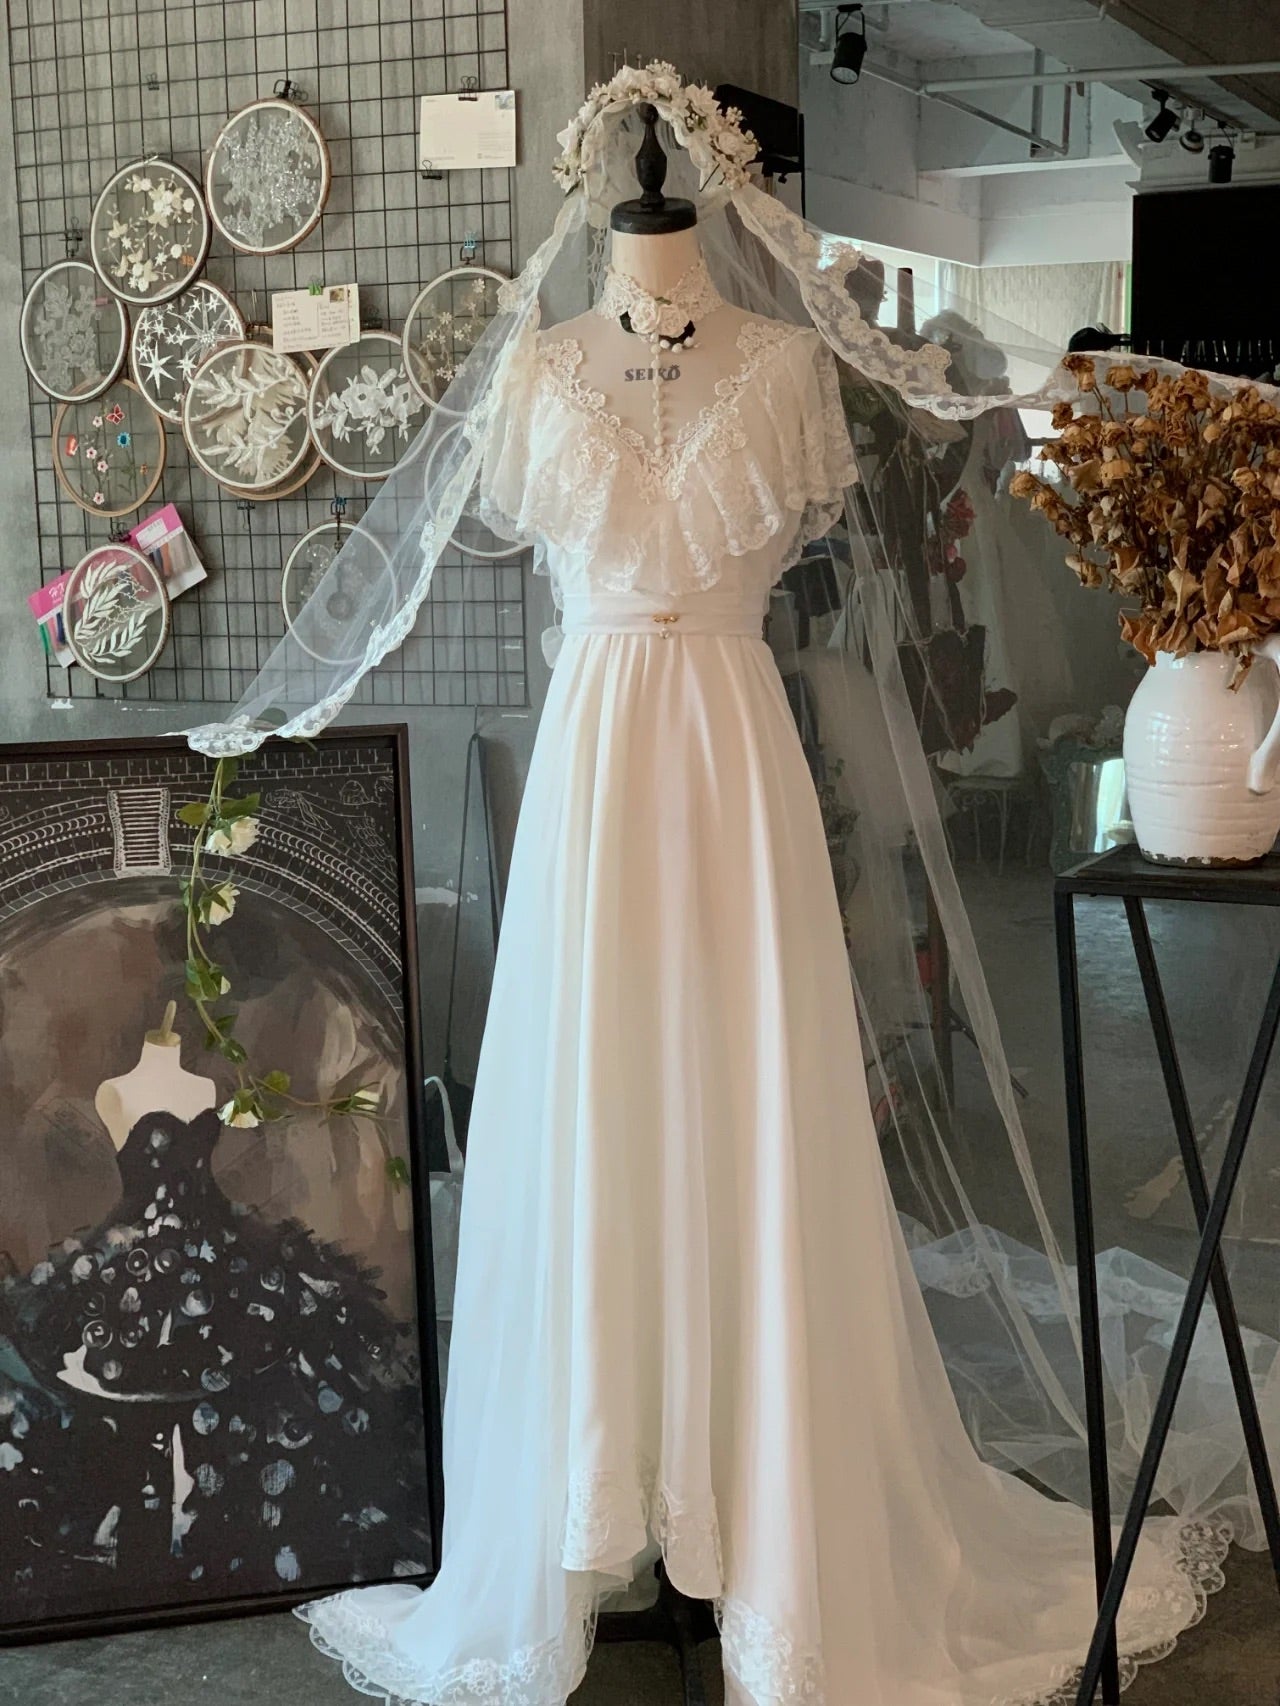 Chiffon Lace Vintage Wedding Dress with Long Sleeves - DollyGown